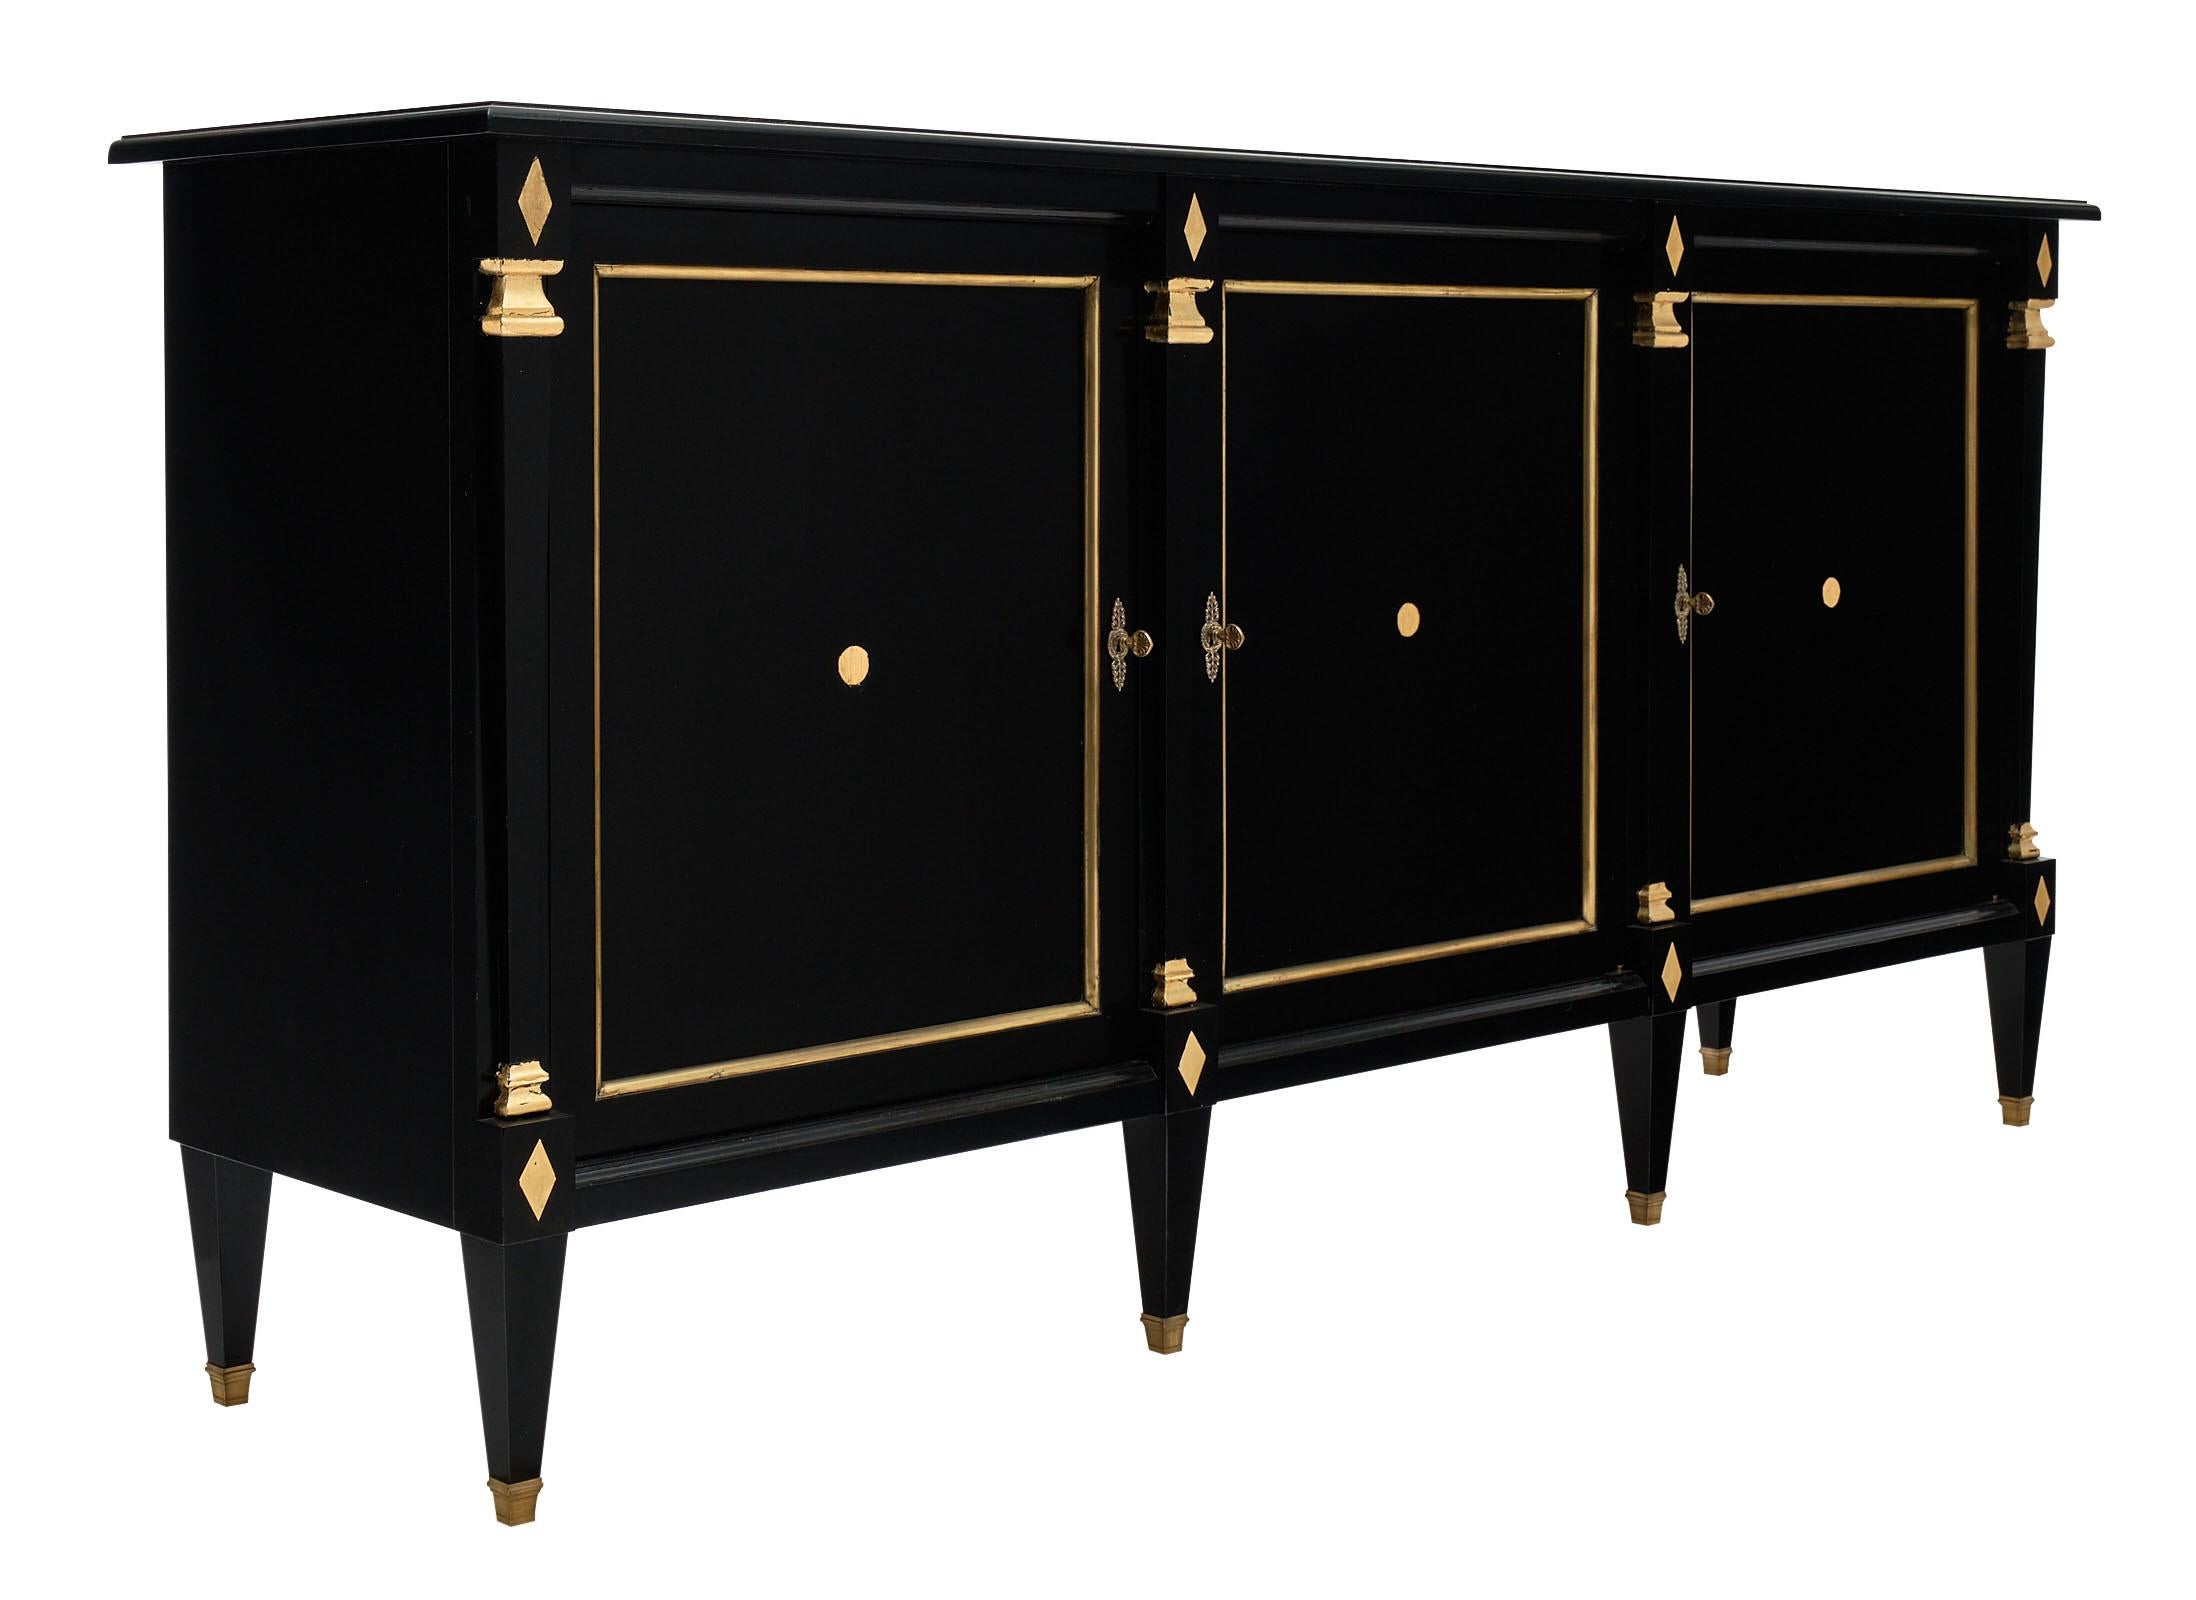 French Directoire antique buffet made of mahogany with filed brass trims throughout and gold leafed details. There are three doors with interior shelving. We love the strong tapered legs and ebonized French polish finish of this case piece.